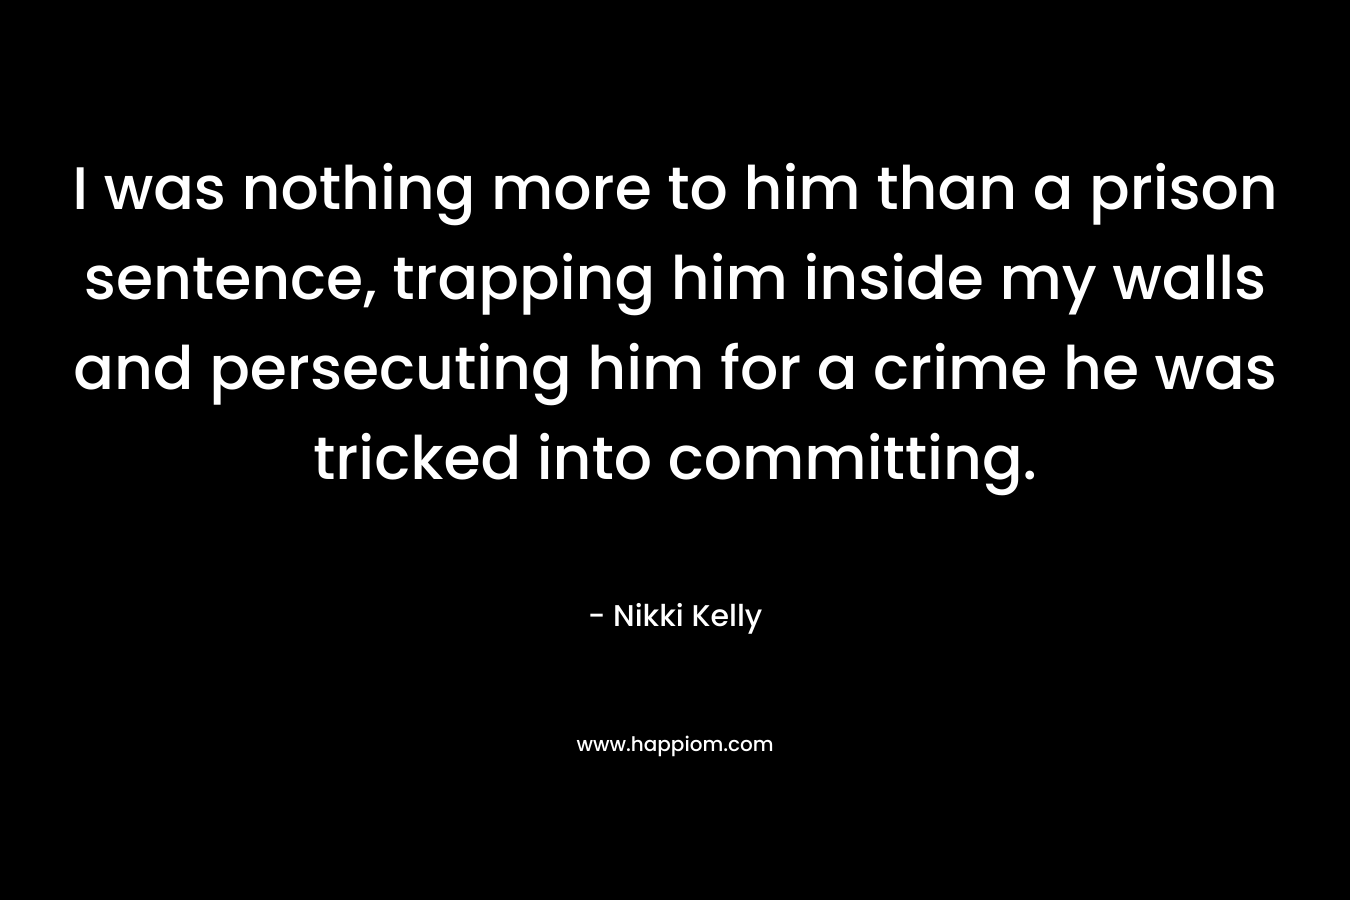 I was nothing more to him than a prison sentence, trapping him inside my walls and persecuting him for a crime he was tricked into committing.